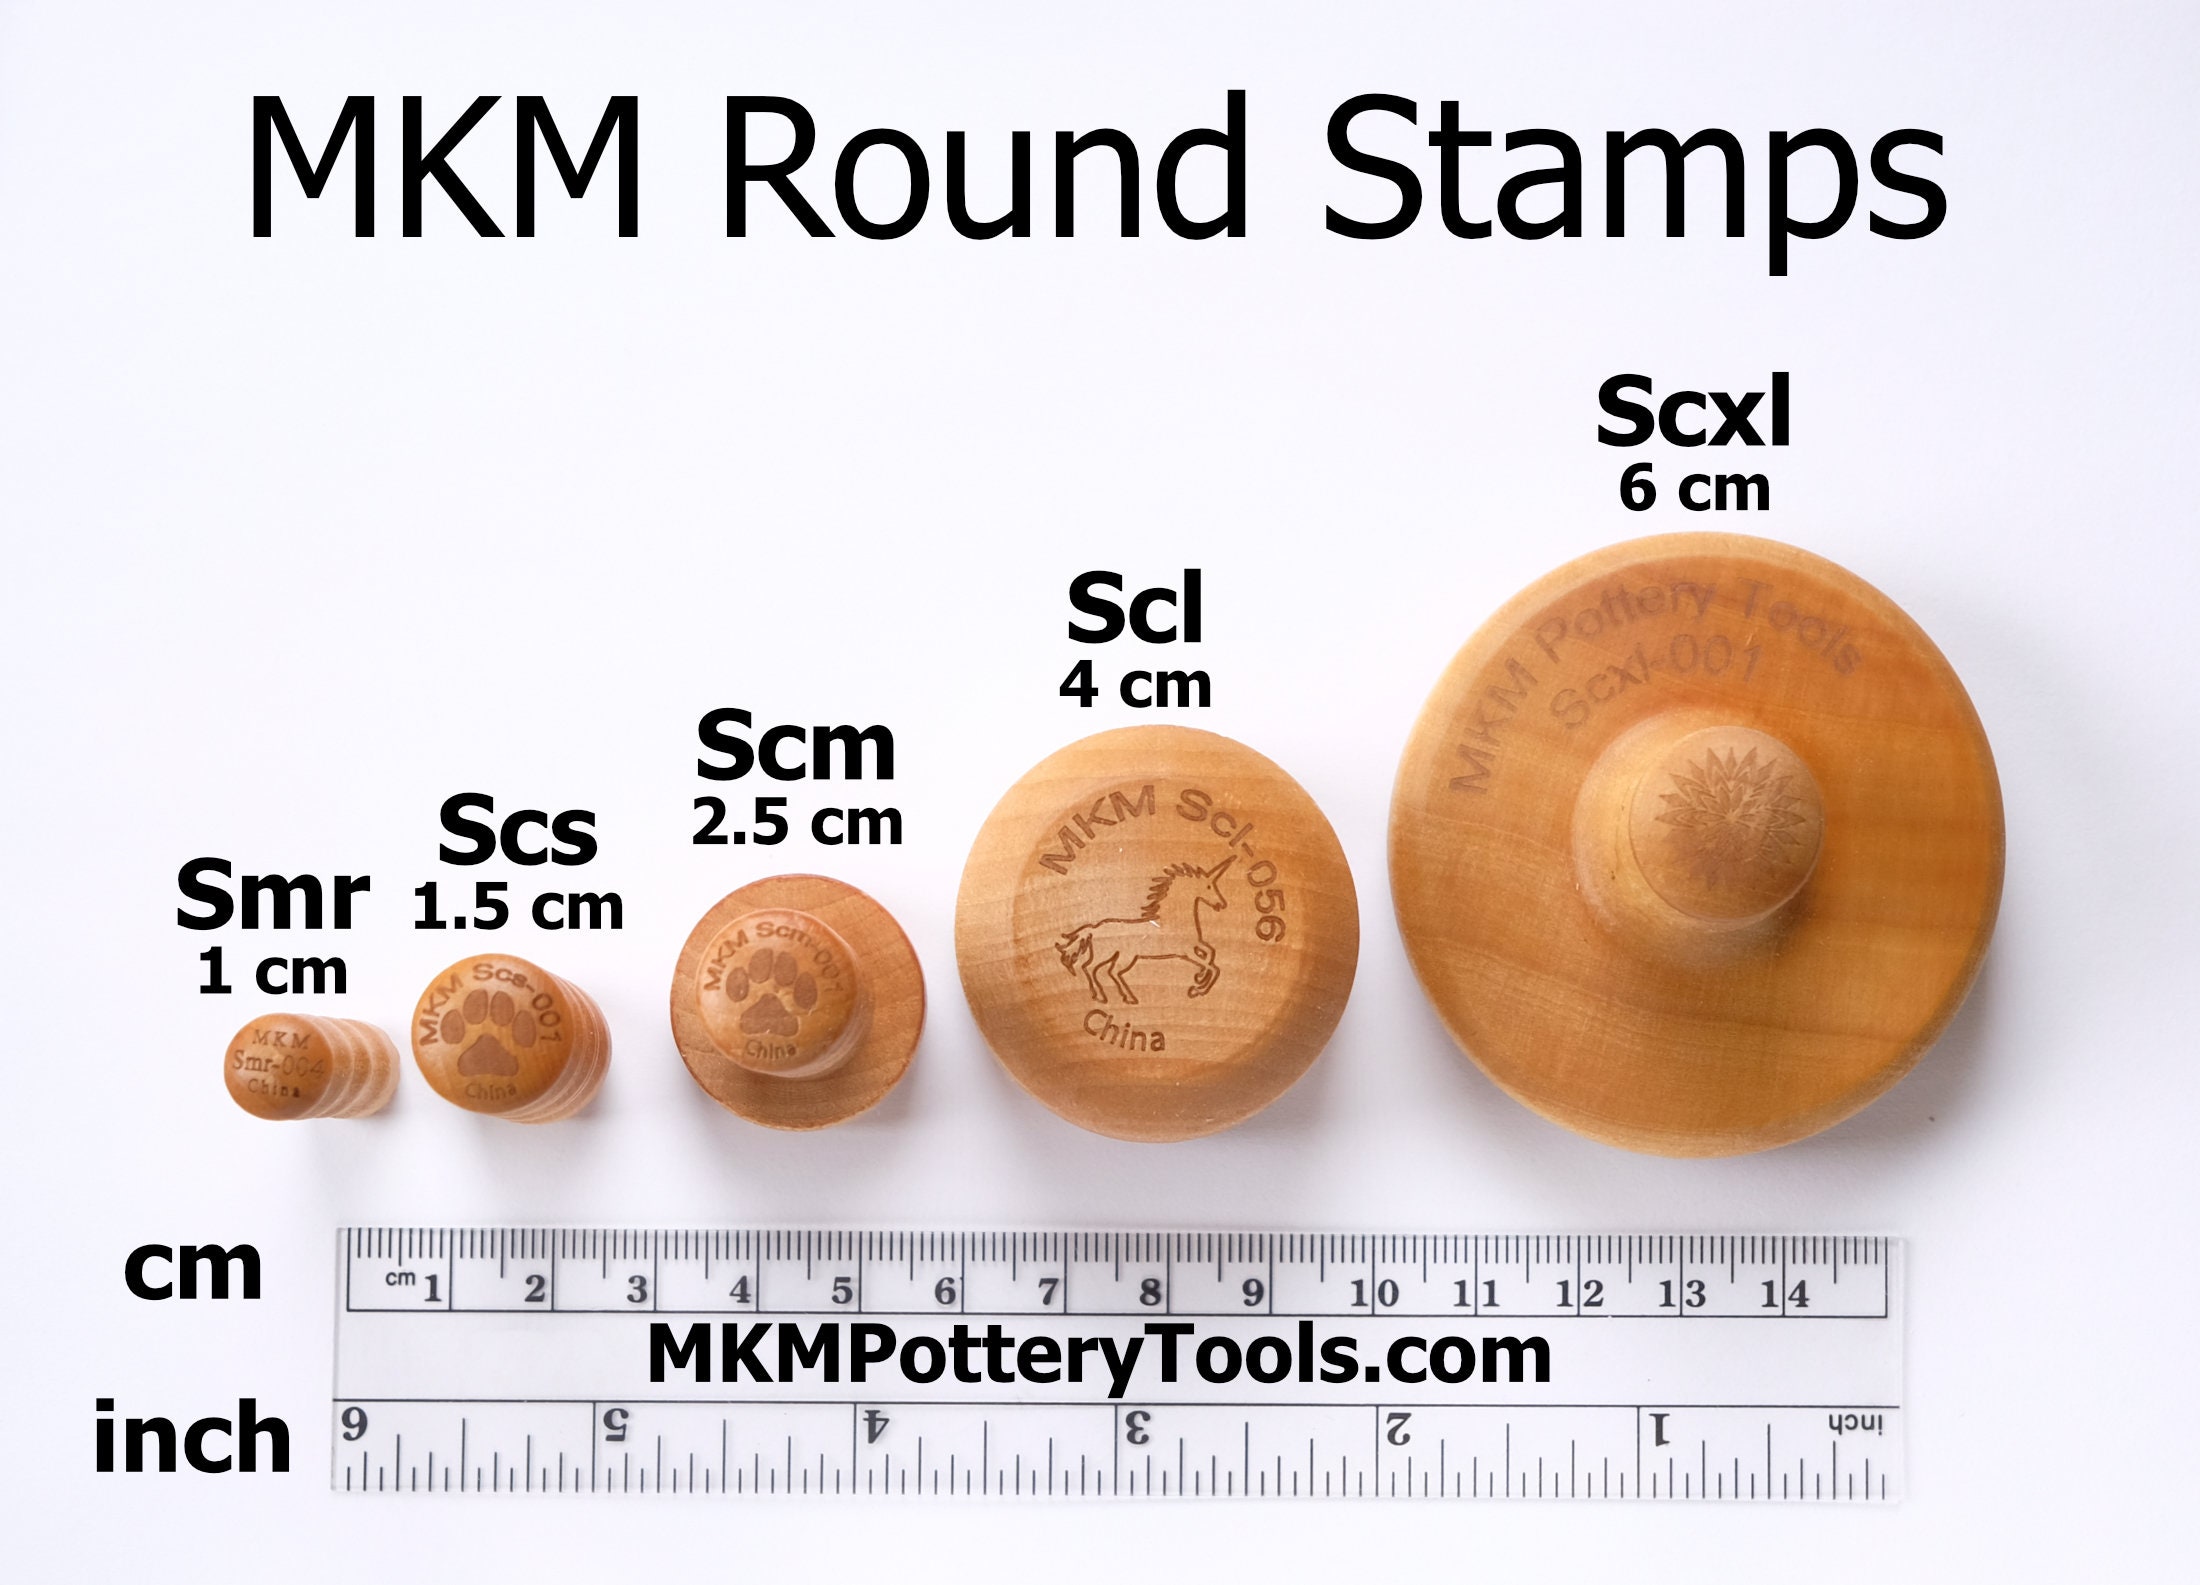 MKM Pottery Tools 4 cm Curve Top Dragon Stamp